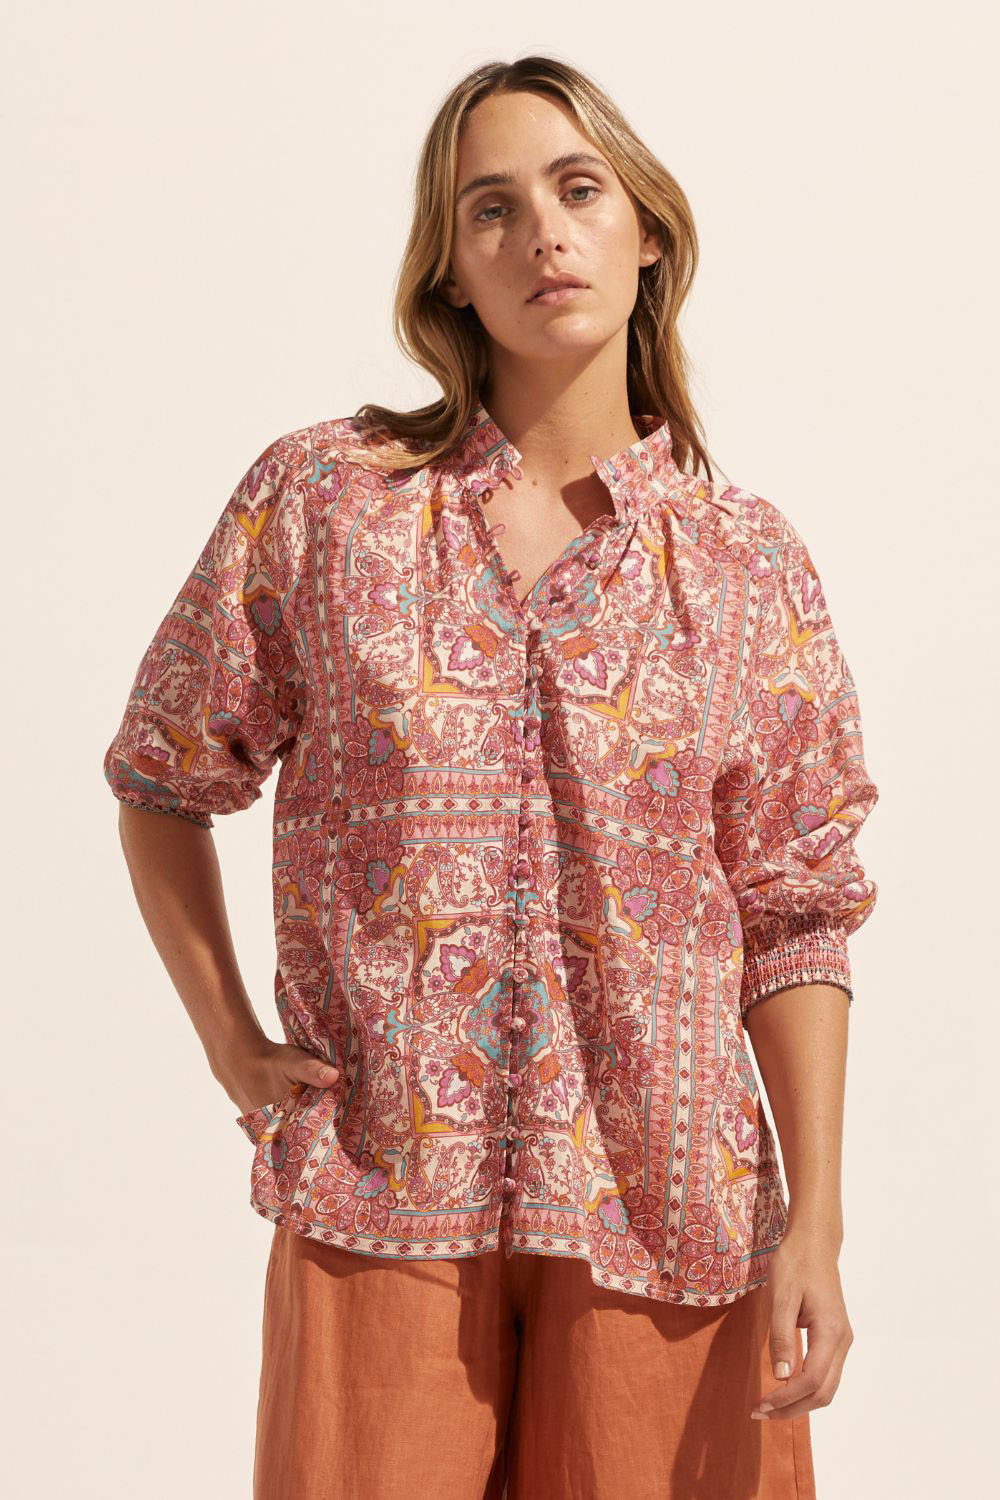 pink print, medium length sleeve, buttons down centre, small side splits, high neck, front image